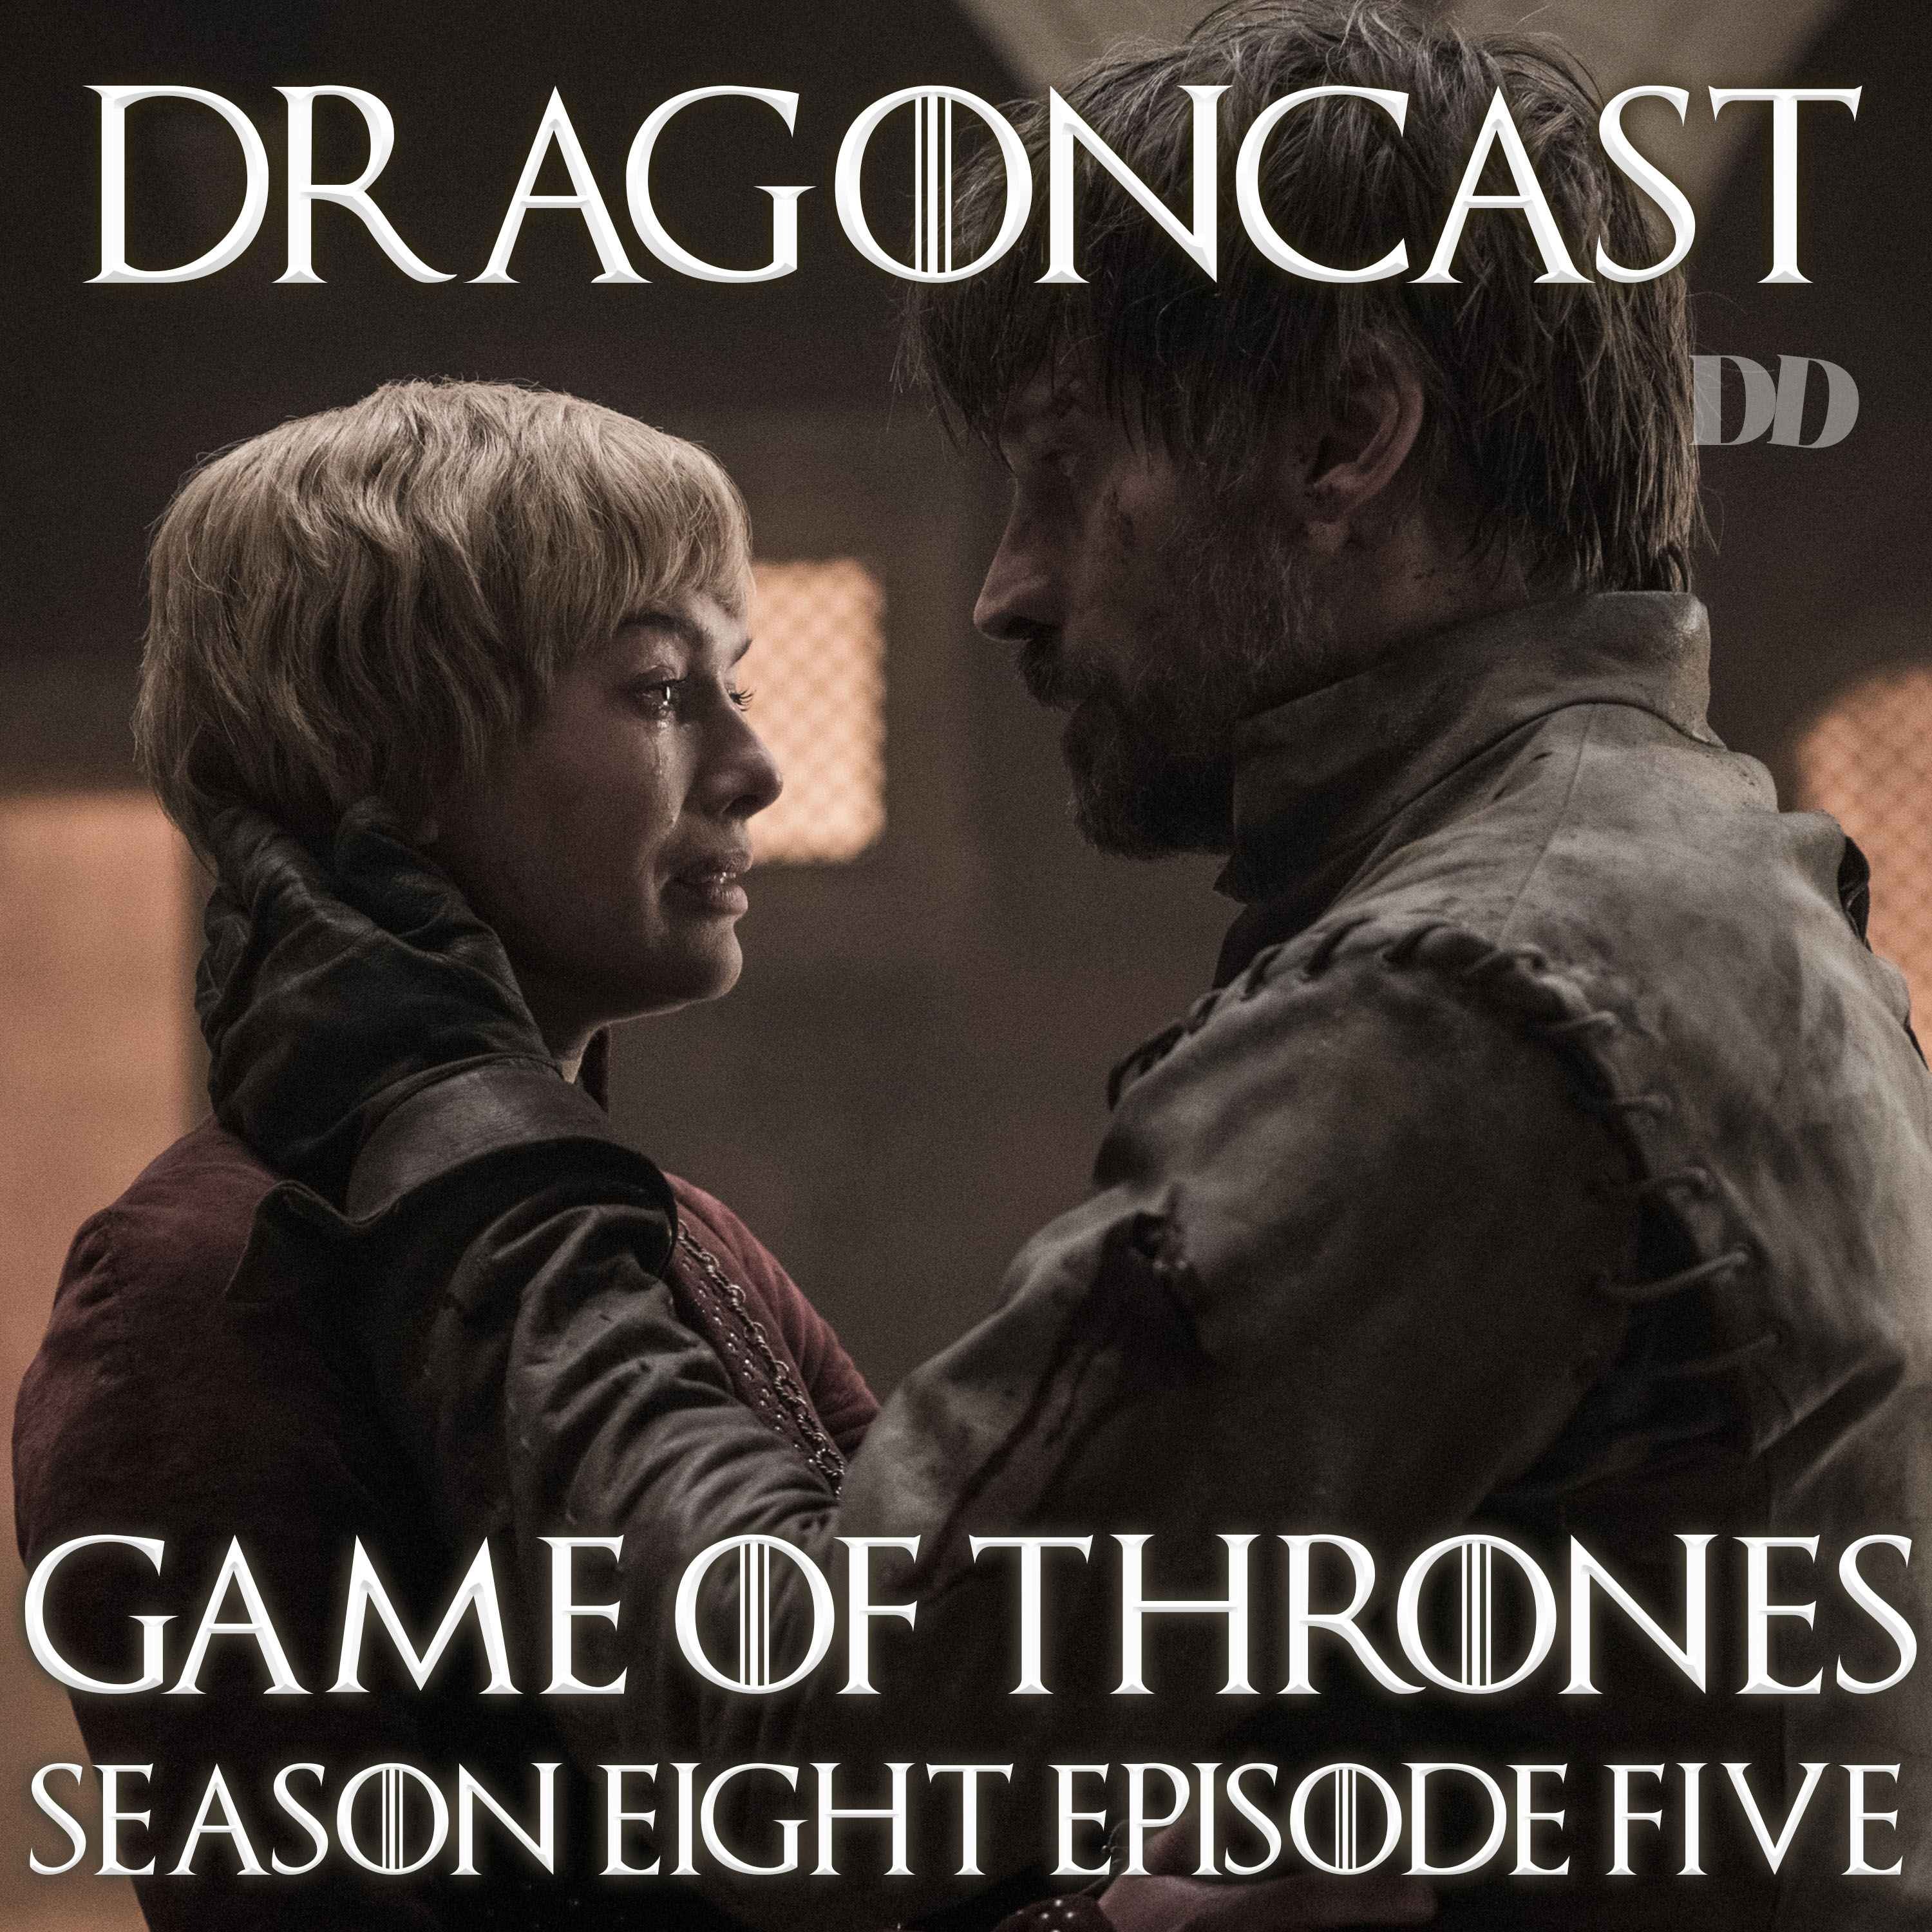 Game of Thrones Rewatch Episode: S8 E5 - The Bells